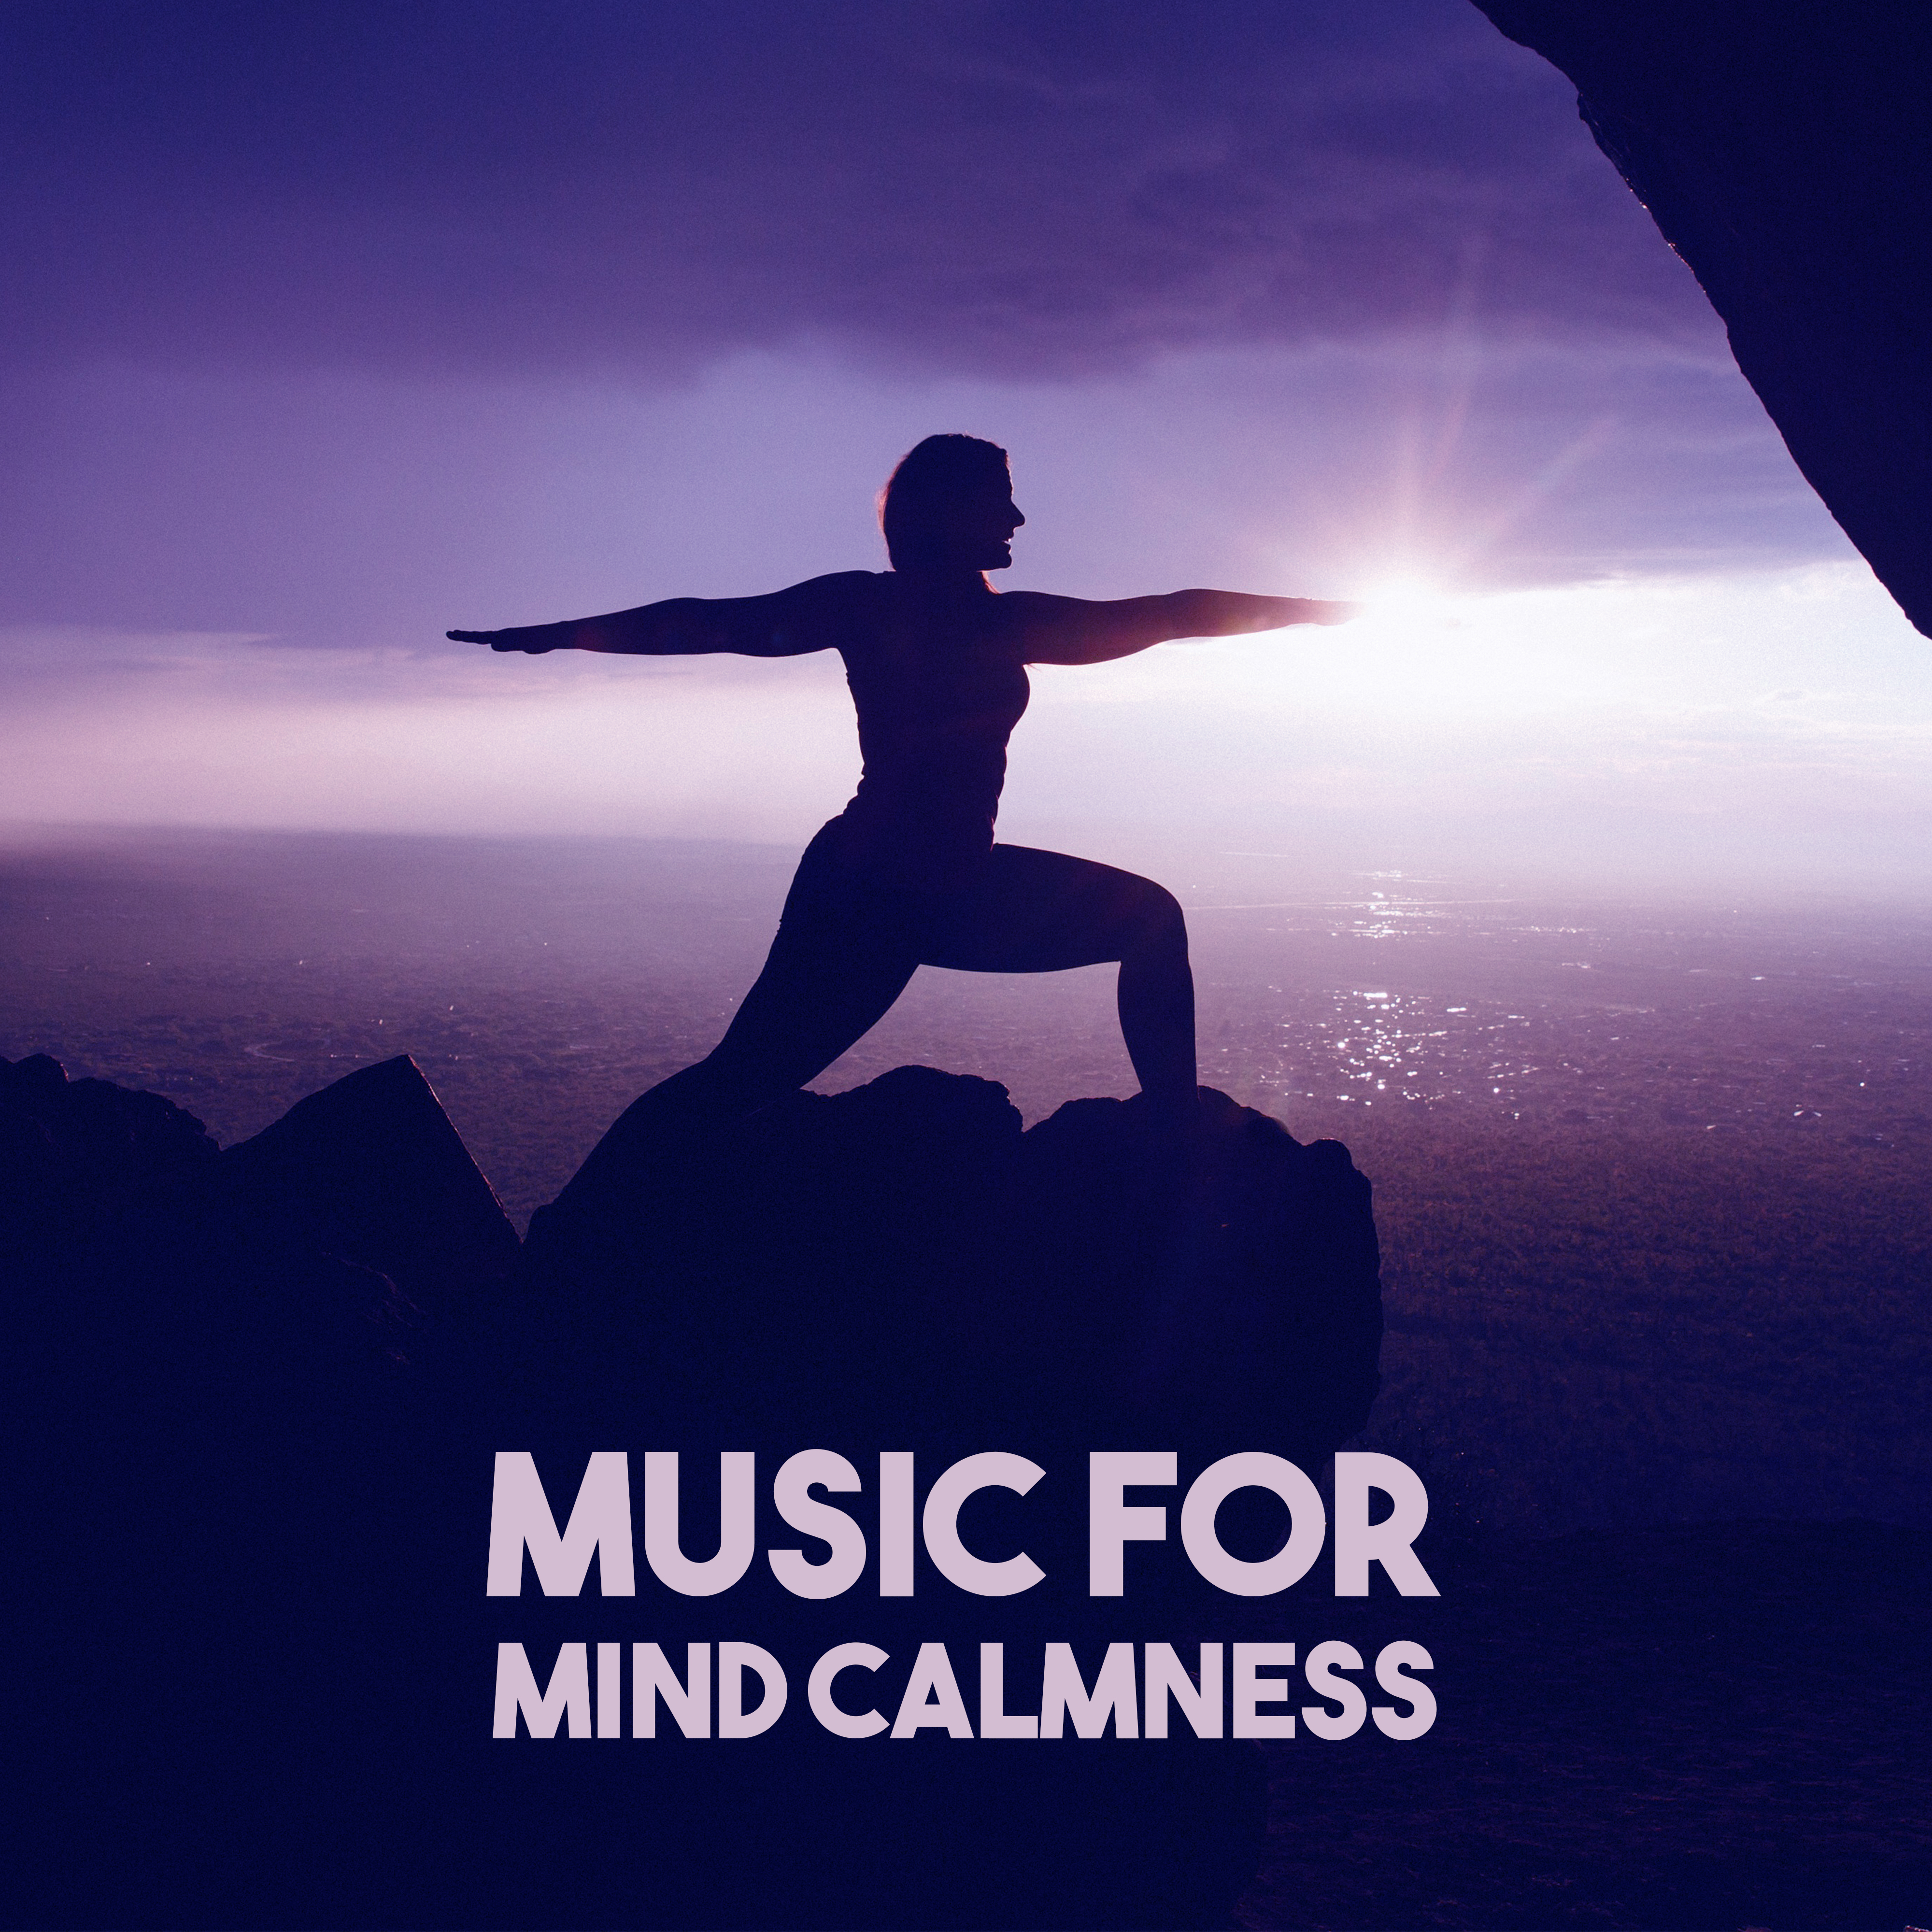 Music for Mind Calmness – Relaxing New Age Music, Meditation Sounds, Chakra Balancing, Soft Sounds for Inner Silence